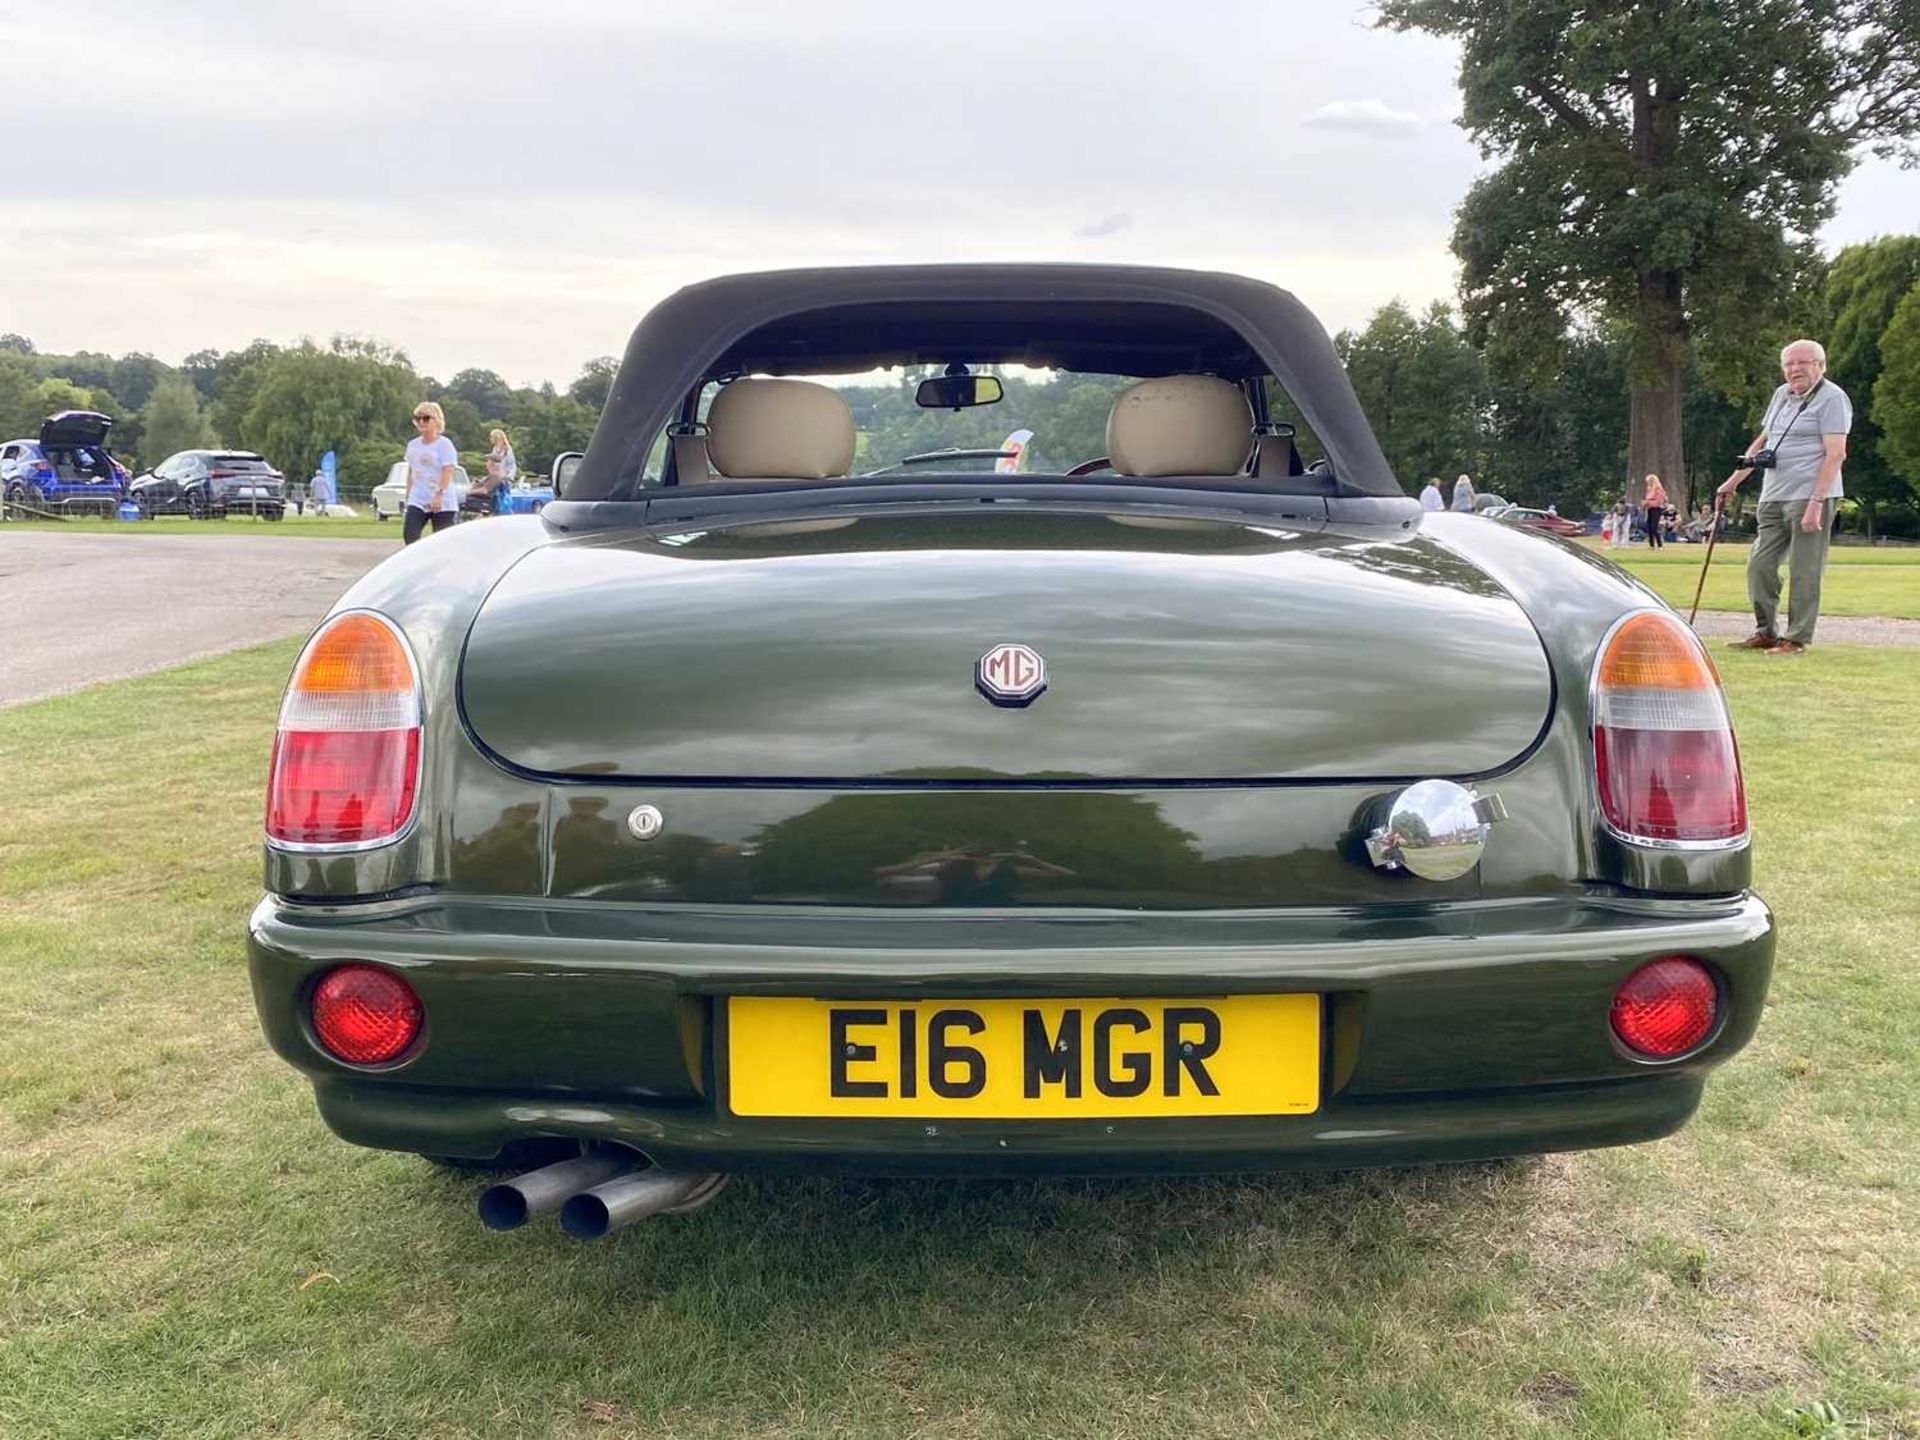 1995 MG RV8 A rare and sought-after car fitted with power steering - Image 13 of 45